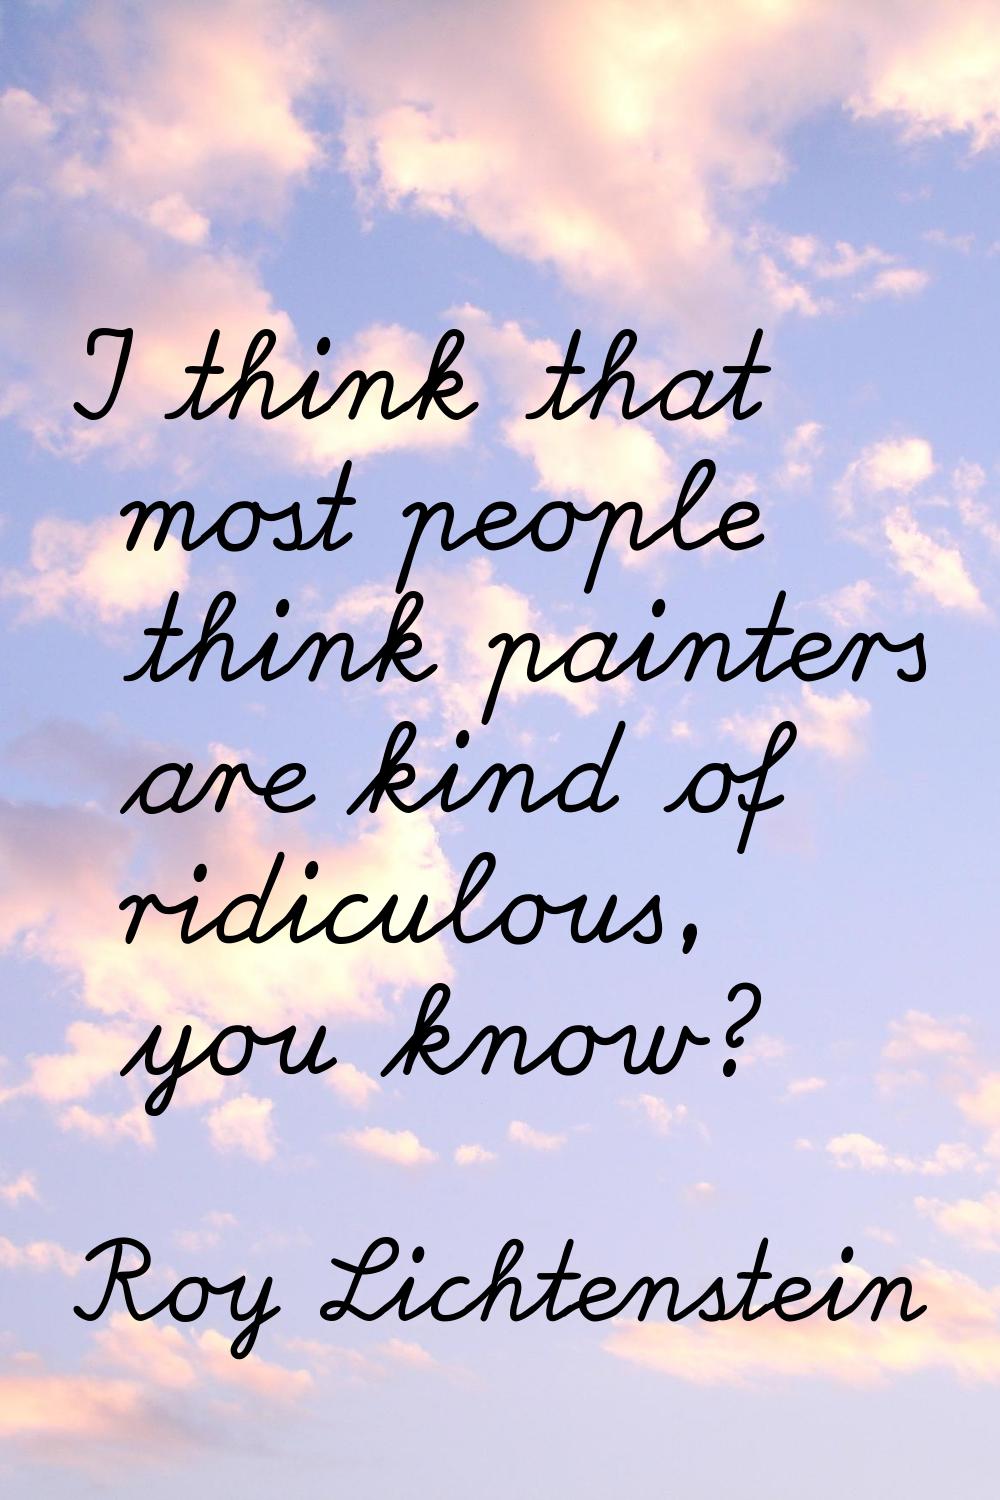 I think that most people think painters are kind of ridiculous, you know?